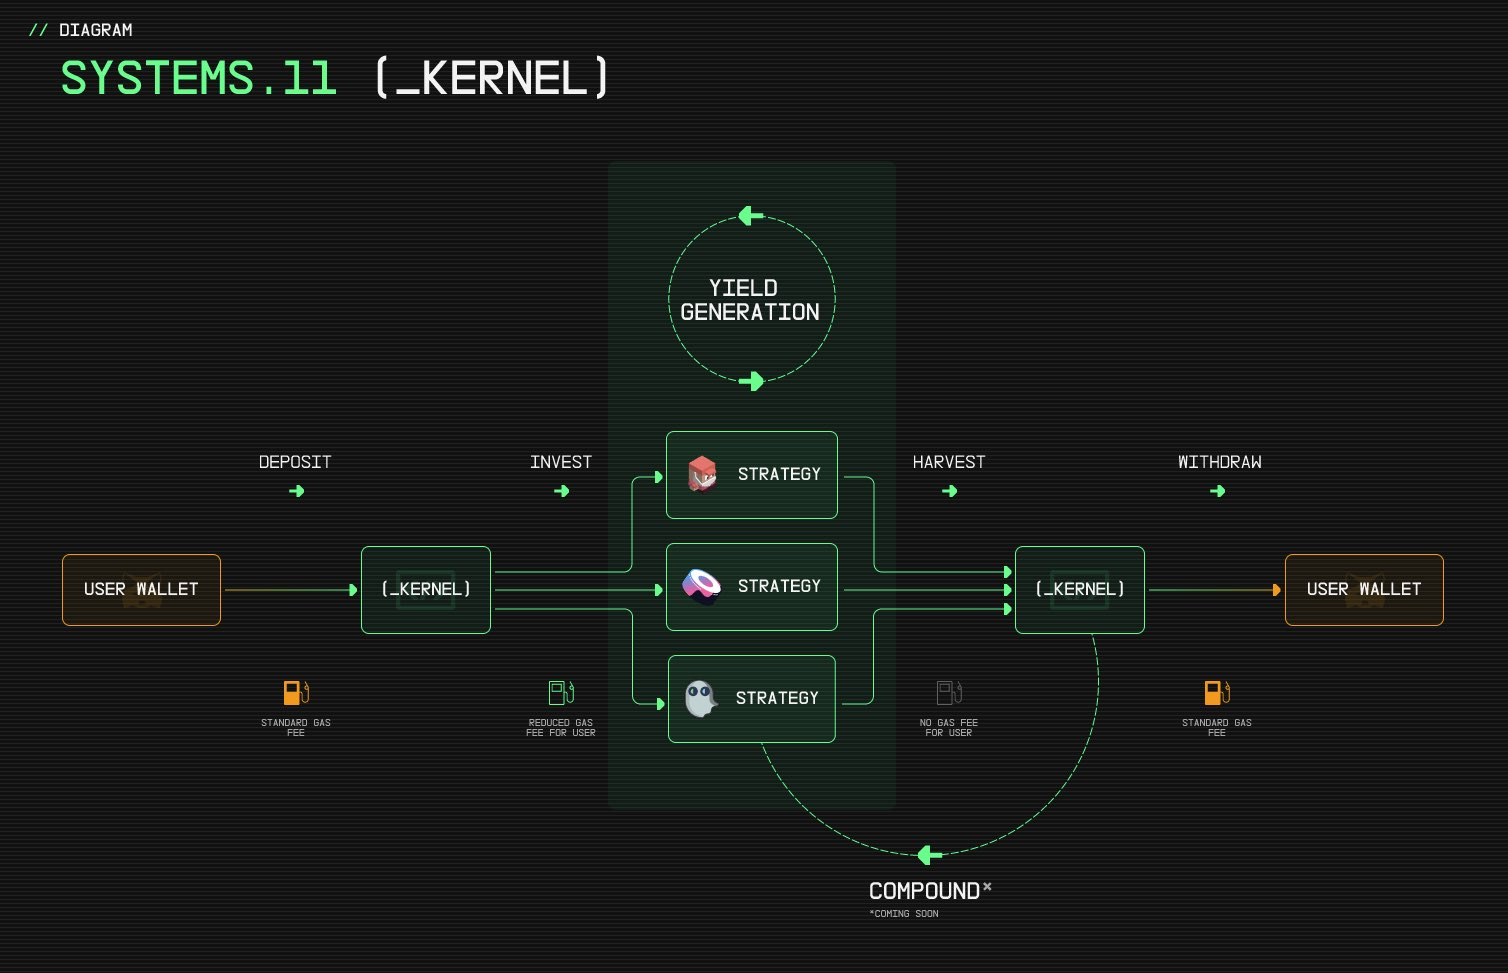 Source: Discord, showing the function of a Kernel 